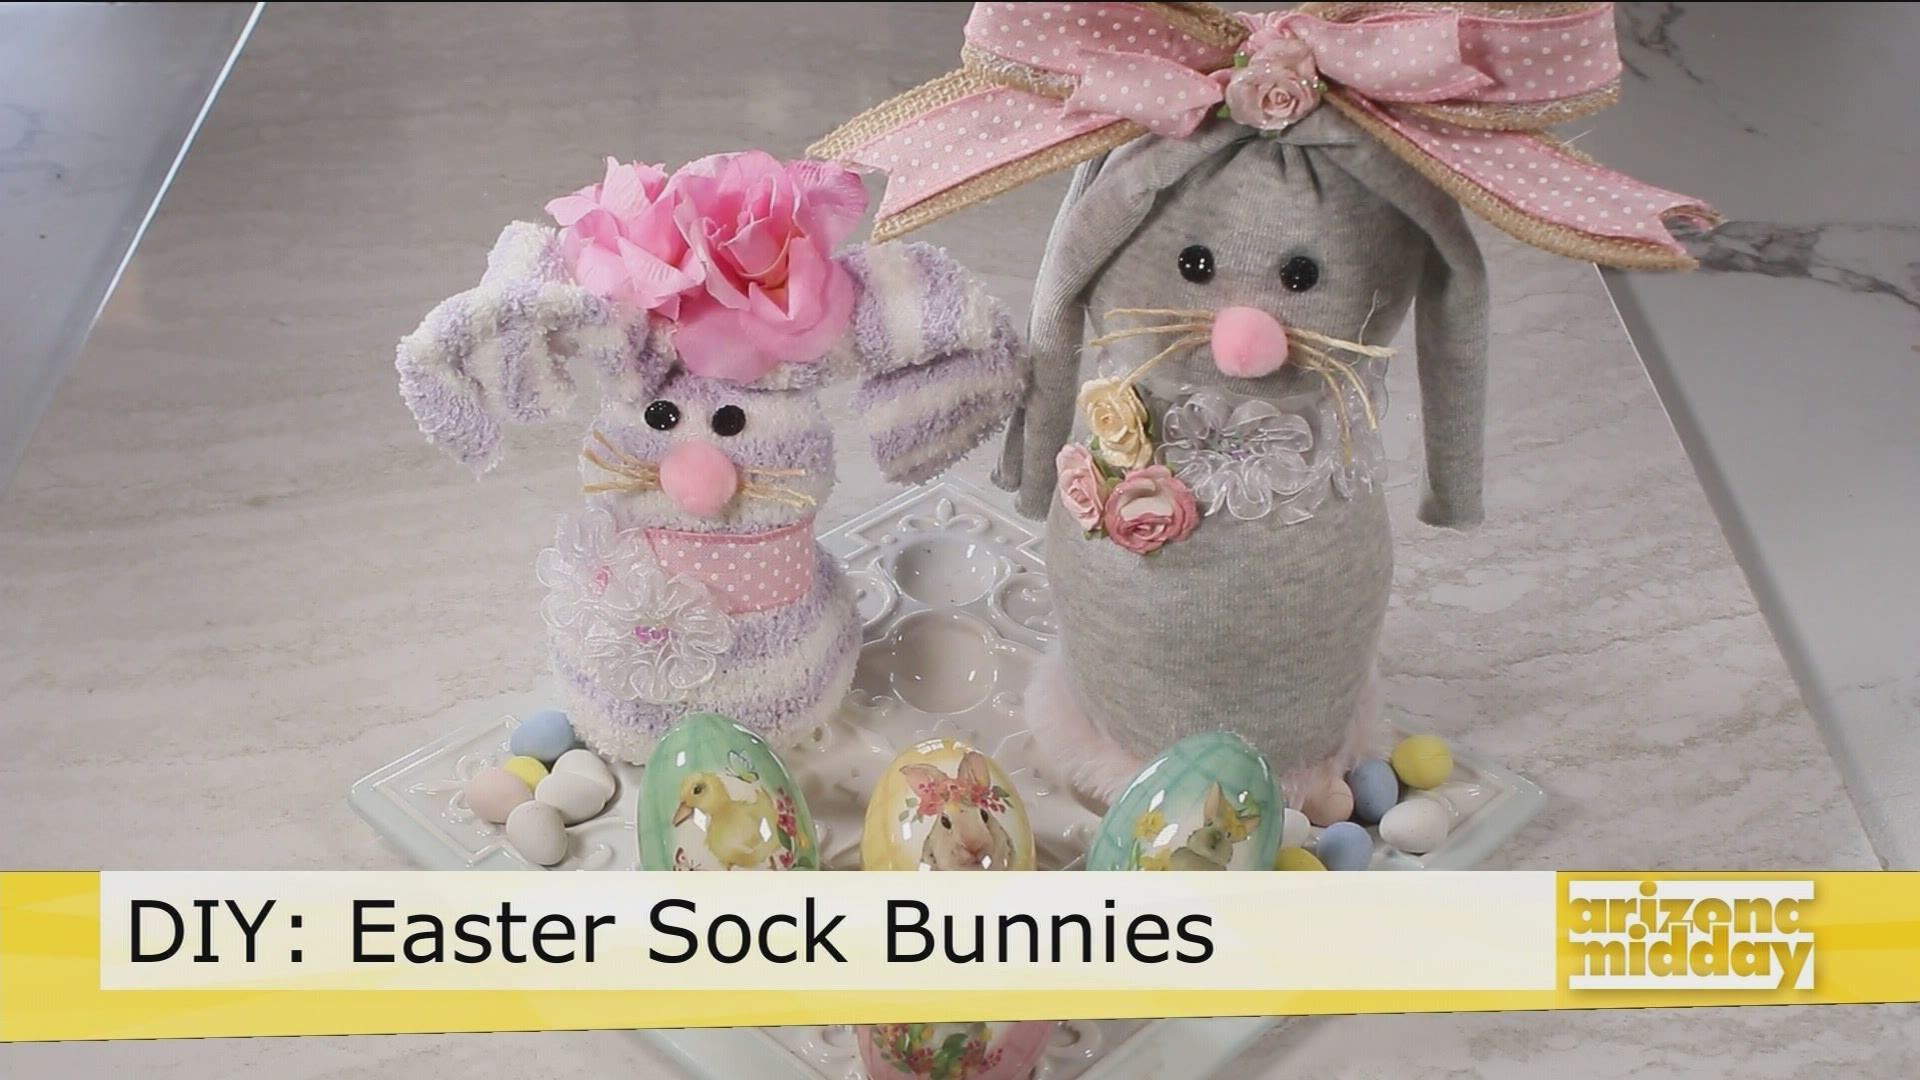 Jan shows us how to create these adorable sock bunnies for Easter